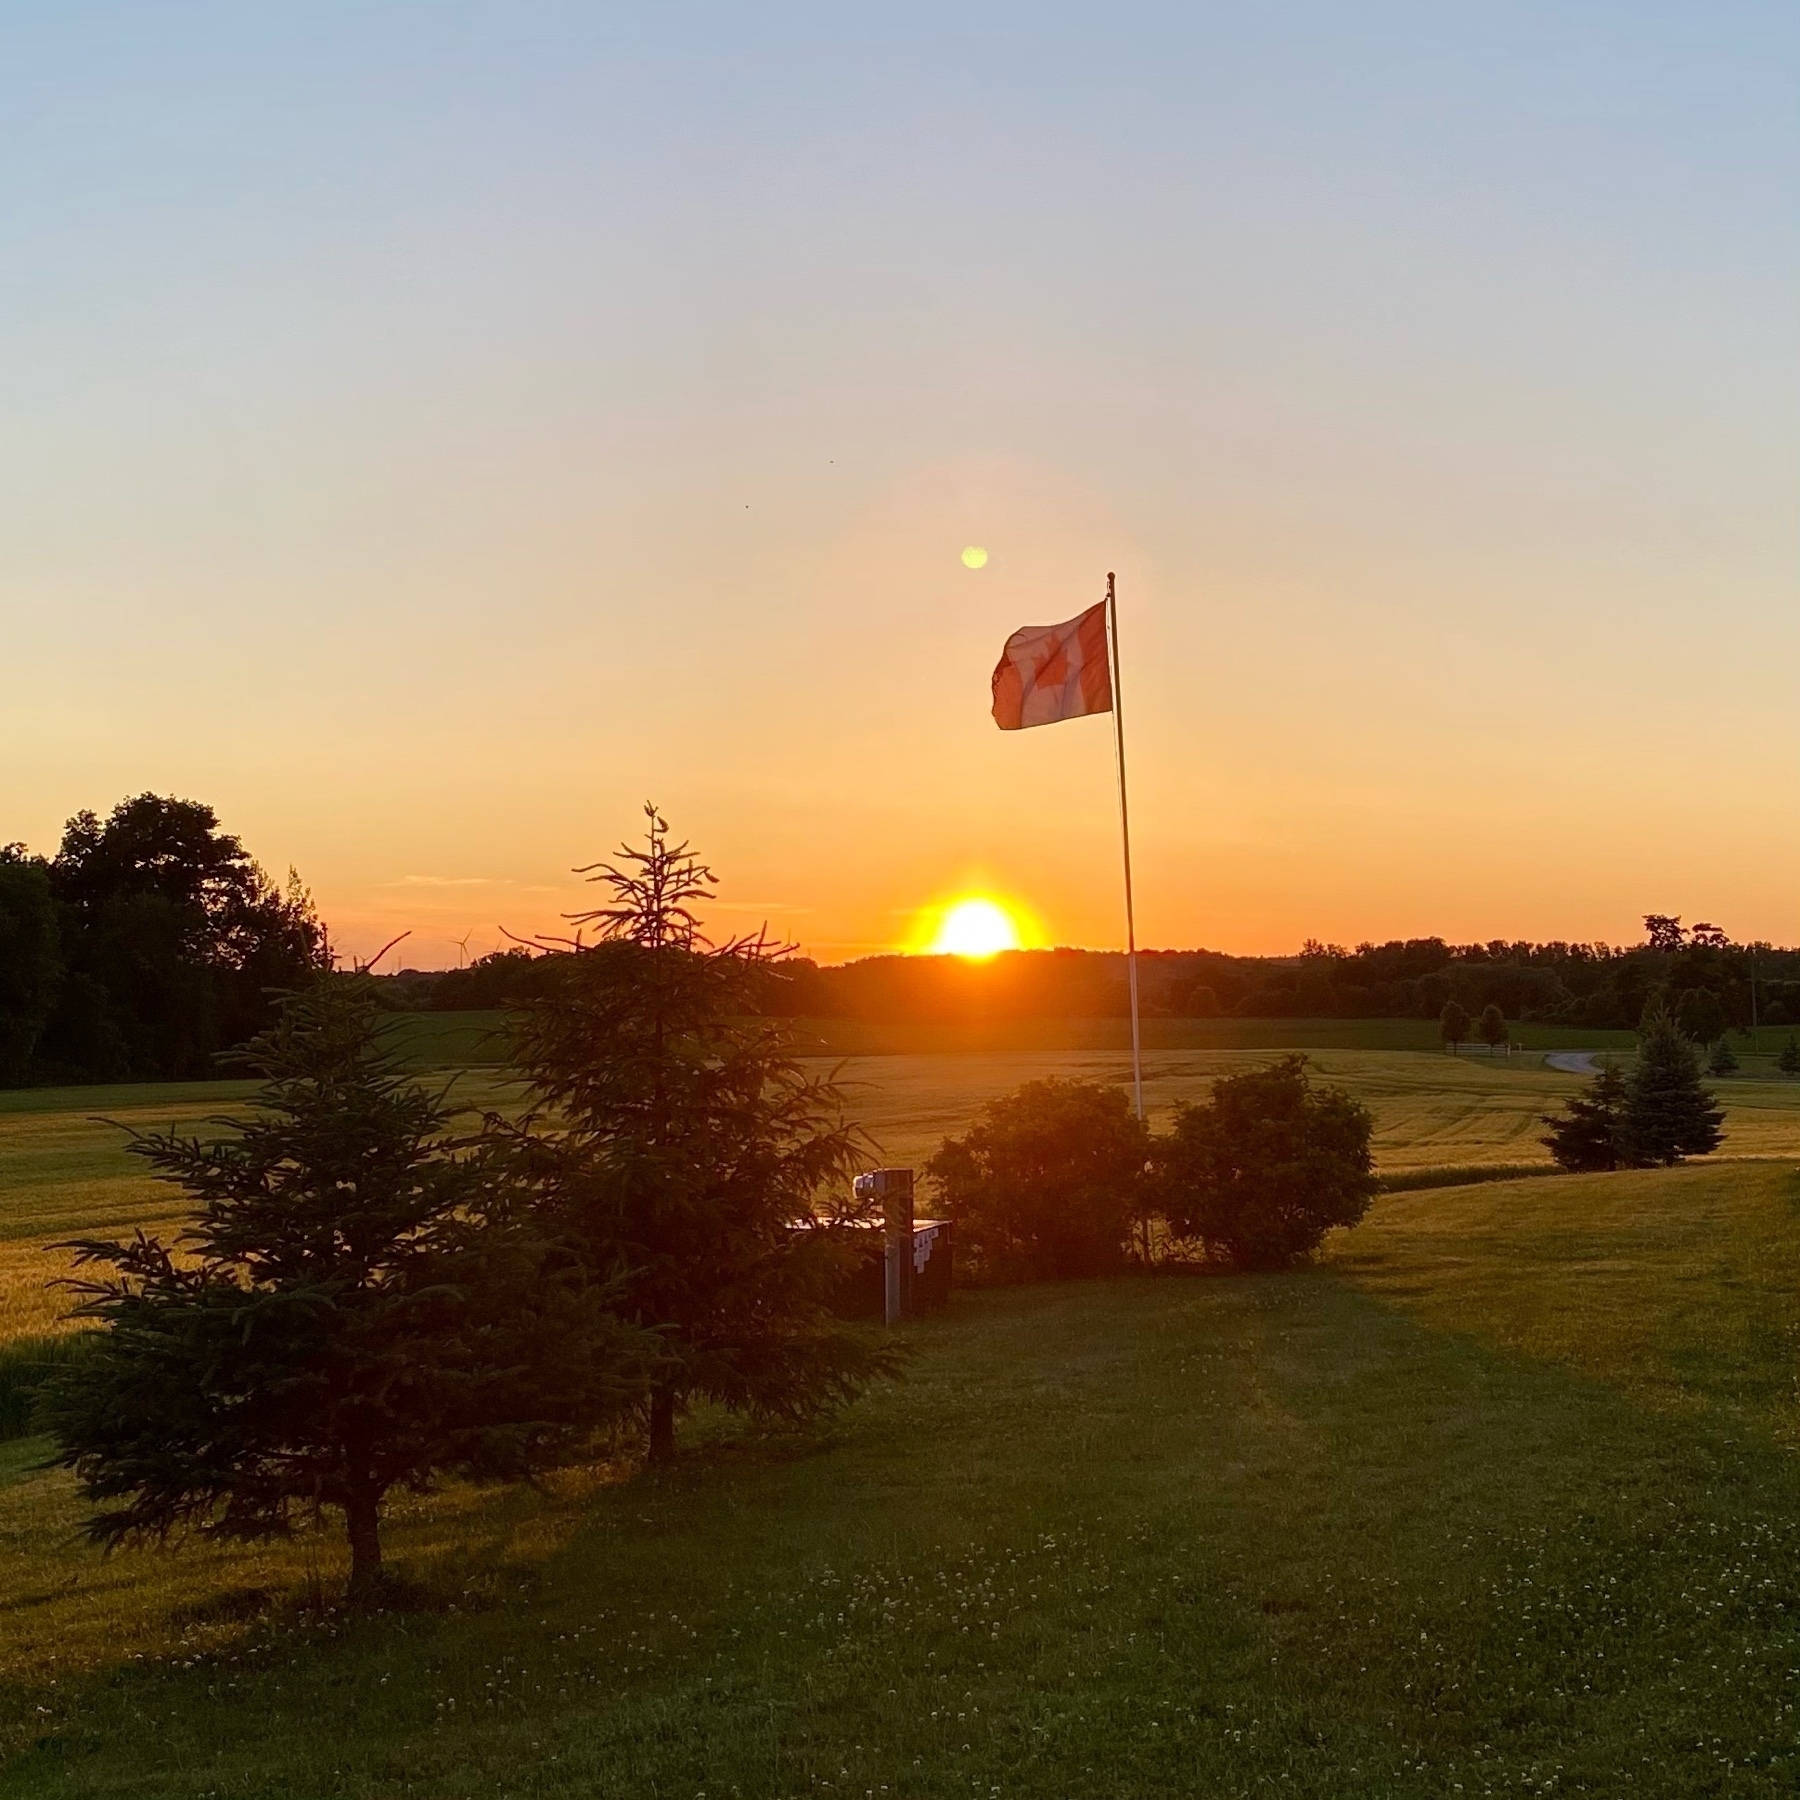 Sun setting over a field with a Canadian flag flying in the foreground